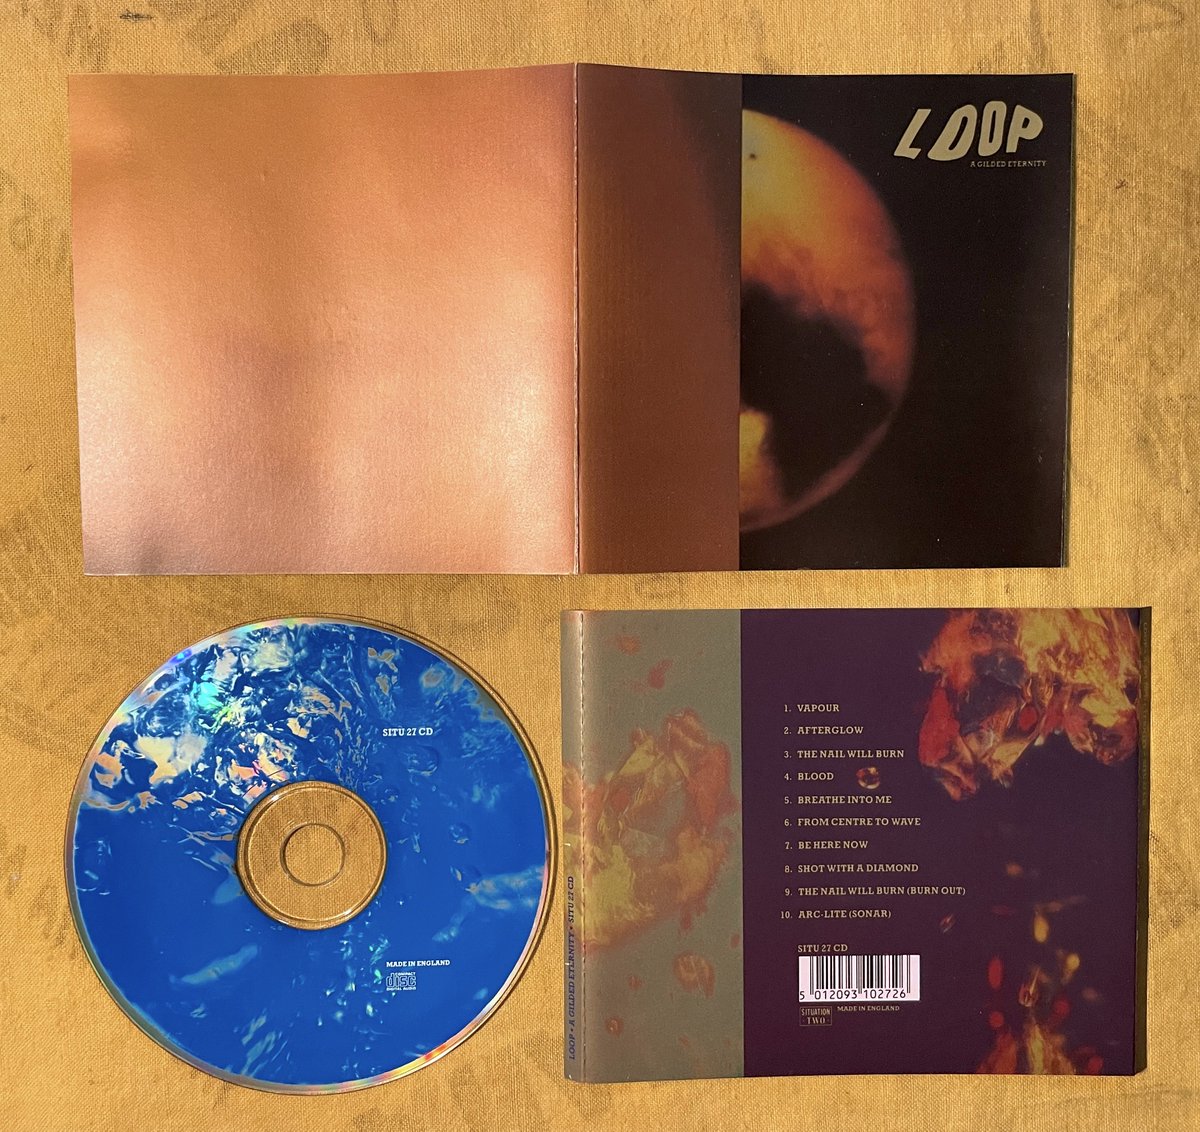 LOOP • A GILDED ETERNITY (Situation Two, 1990) 3rd record swaps out some of their #psychedelic 60’s flavoring for harsher #postpunk tonalities. Heavier, yet more atmospheric than before, they split soon after. Hit #1 on the UK Indie Chart. #shoegaze #spacerock #AlbumADay 082/366